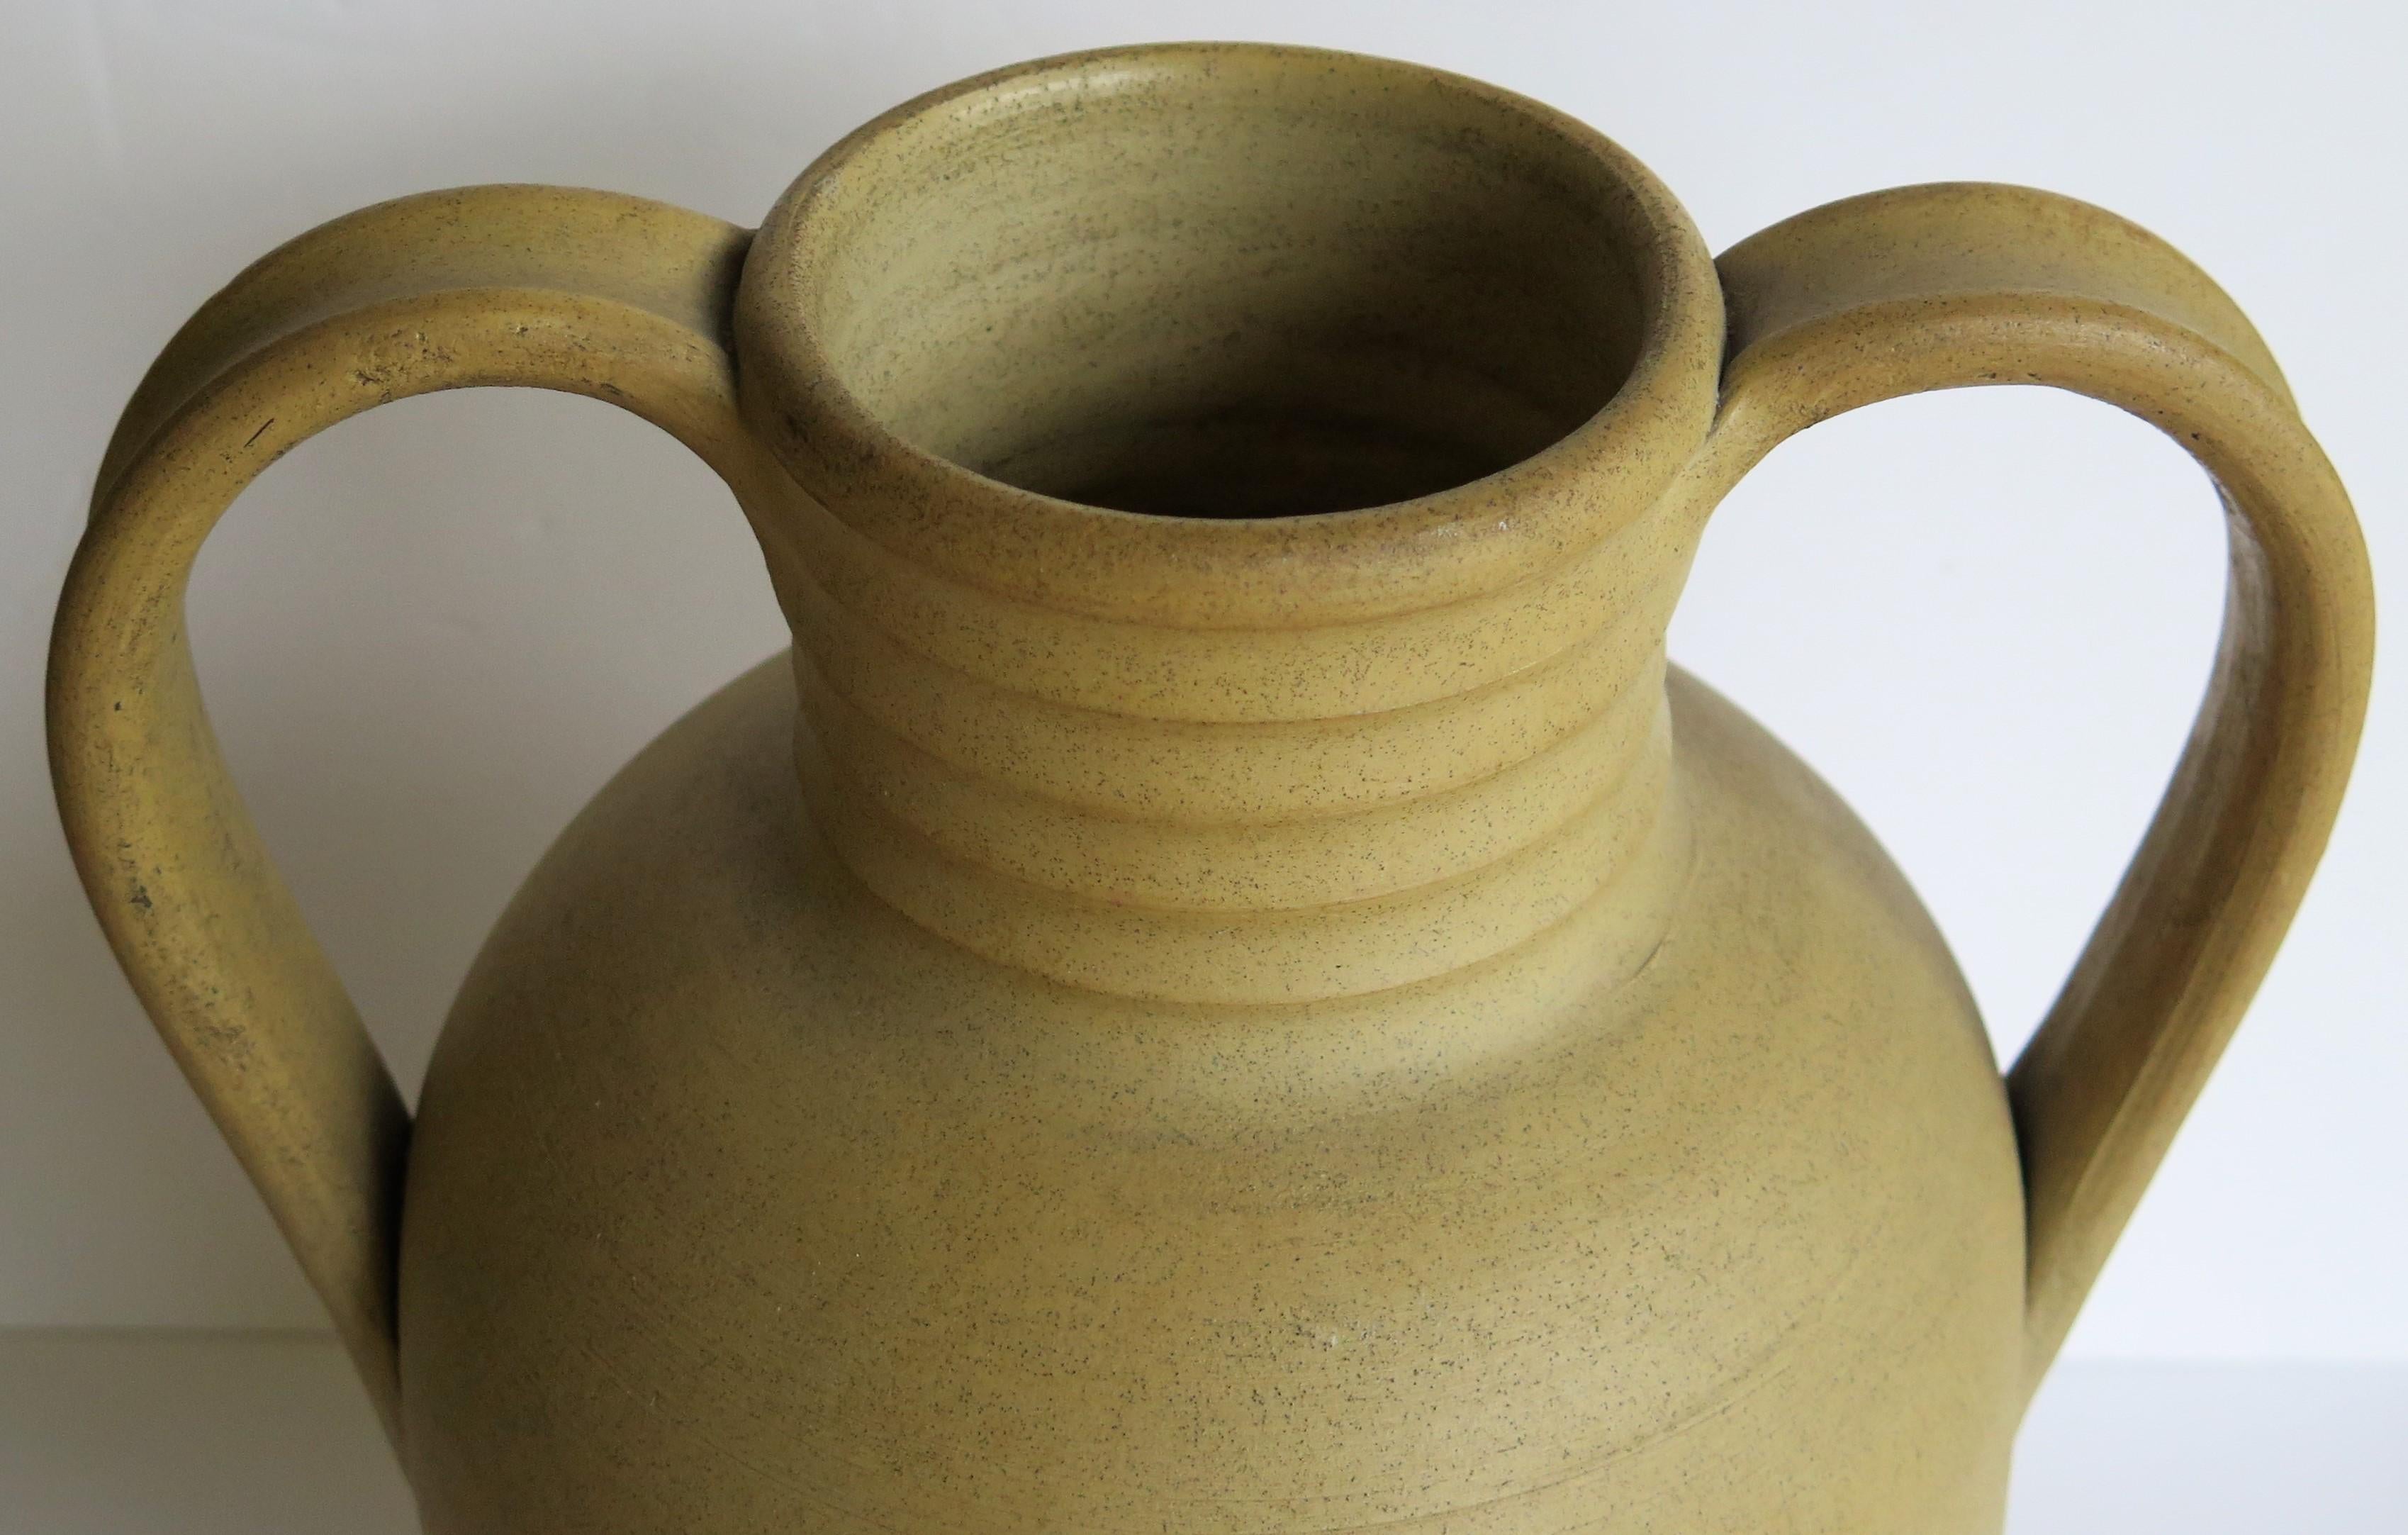 Large Stoneware Vase or Urn by Moira Pottery Hillstonia Hand Potted, circa 1935 For Sale 2